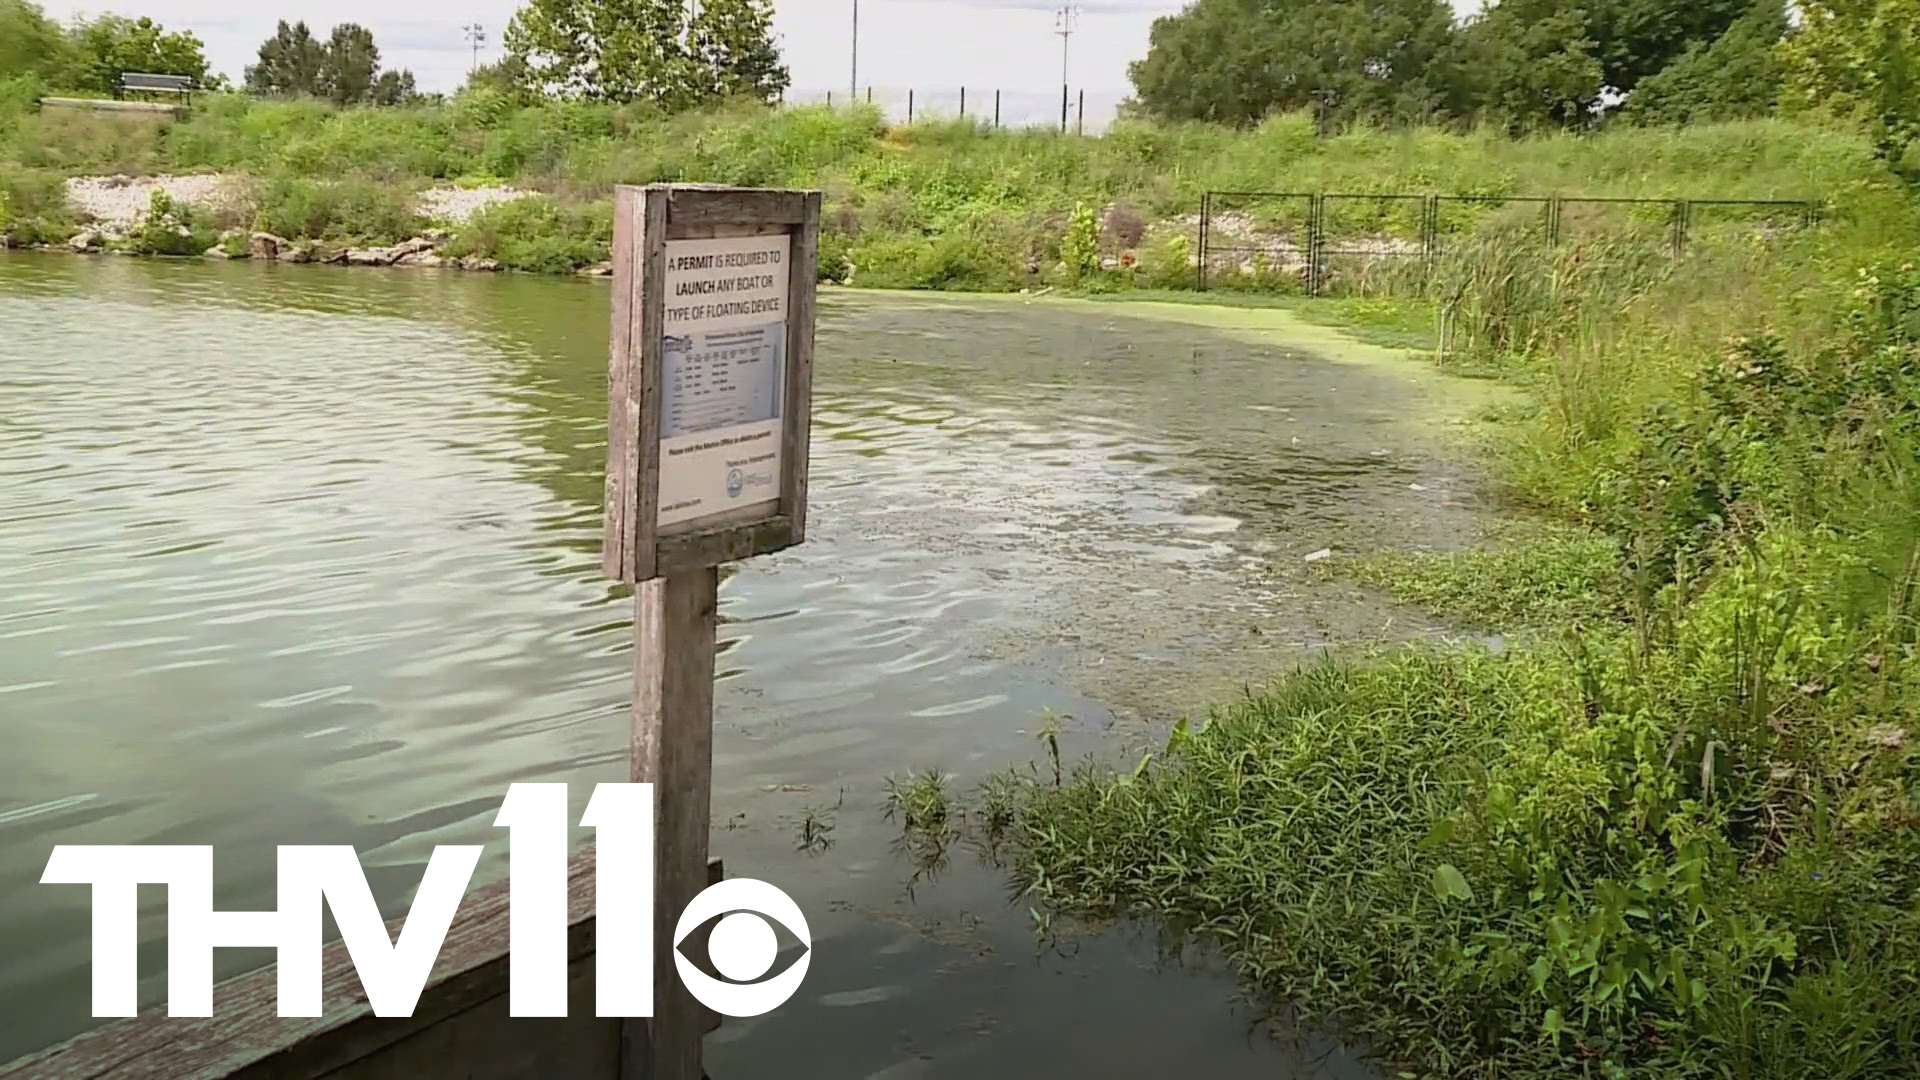 Harmful algal blooms can provide a myriad of toxins. More specifically, Lake Fayetteville has become susceptible to a liver toxin and possible human carcinogen.